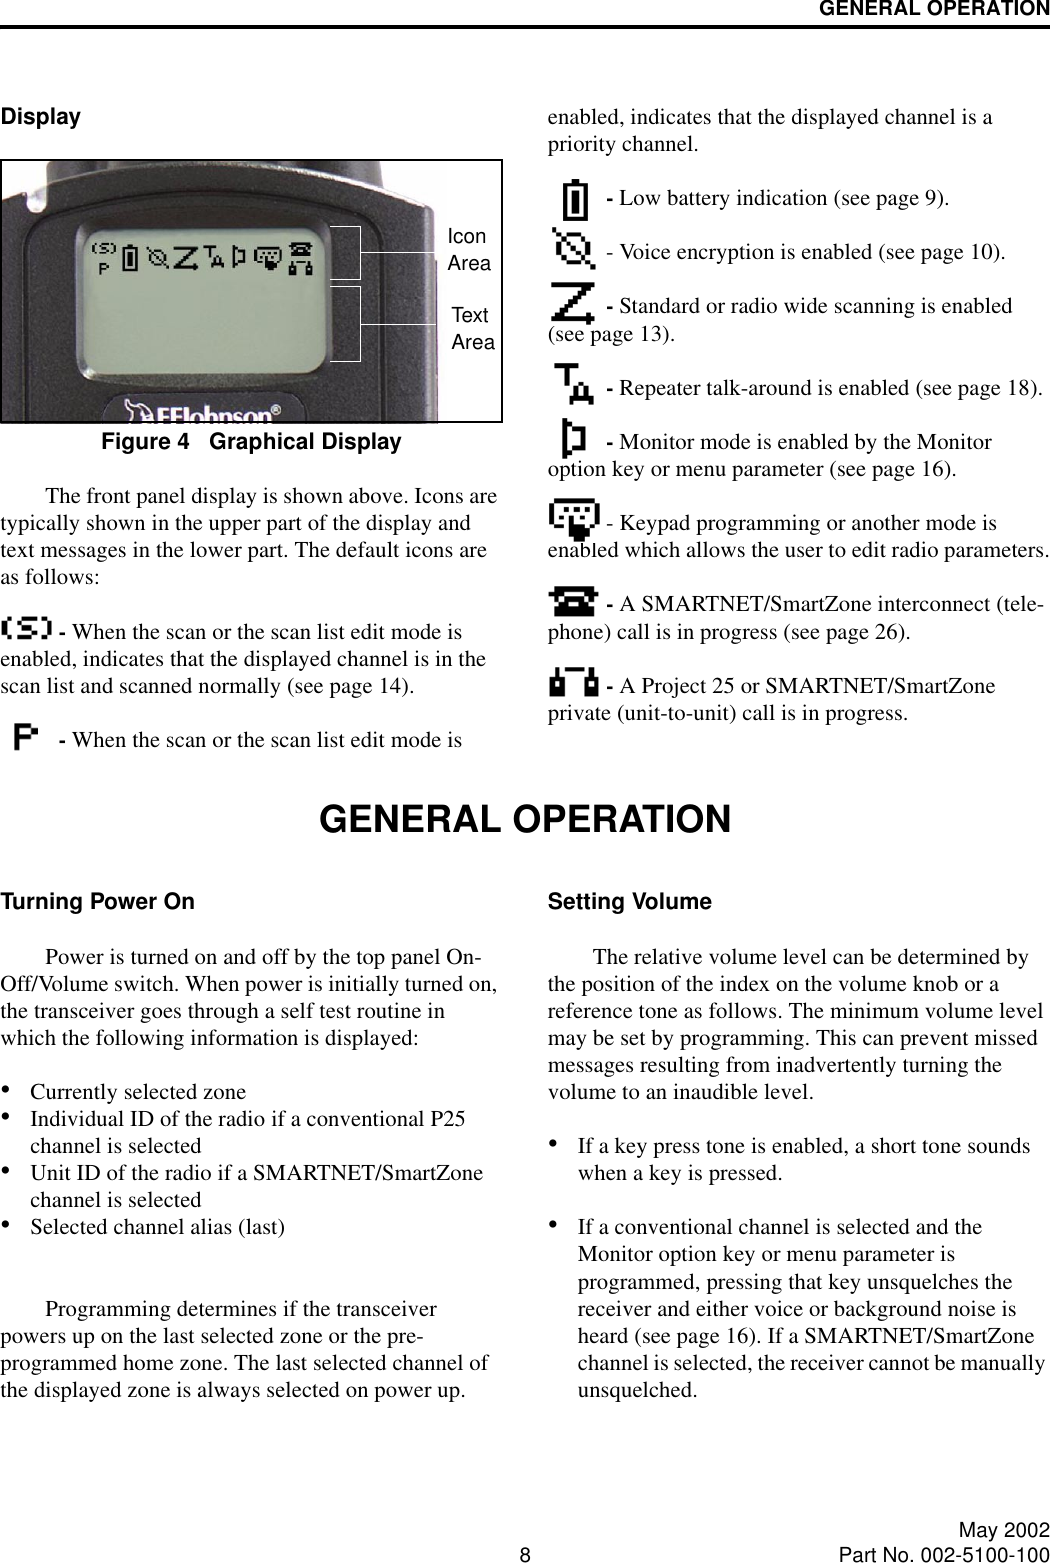 GENERAL OPERATION8May 2002Part No. 002-5100-100DisplayFigure 4   Graphical DisplayThe front panel display is shown above. Icons are typically shown in the upper part of the display and text messages in the lower part. The default icons are as follows: - When the scan or the scan list edit mode is enabled, indicates that the displayed channel is in the scan list and scanned normally (see page 14). - When the scan or the scan list edit mode is enabled, indicates that the displayed channel is a priority channel. - Low battery indication (see page 9). - Voice encryption is enabled (see page 10). - Standard or radio wide scanning is enabled (see page 13). - Repeater talk-around is enabled (see page 18). - Monitor mode is enabled by the Monitor option key or menu parameter (see page 16). - Keypad programming or another mode is enabled which allows the user to edit radio parameters. - A SMARTNET/SmartZone interconnect (tele-phone) call is in progress (see page 26).  - A Project 25 or SMARTNET/SmartZone private (unit-to-unit) call is in progress.GENERAL OPERATIONTurning Power OnPower is turned on and off by the top panel On-Off/Volume switch. When power is initially turned on, the transceiver goes through a self test routine in which the following information is displayed:•Currently selected zone•Individual ID of the radio if a conventional P25 channel is selected•Unit ID of the radio if a SMARTNET/SmartZone channel is selected •Selected channel alias (last)Programming determines if the transceiver powers up on the last selected zone or the pre-programmed home zone. The last selected channel of the displayed zone is always selected on power up. Setting VolumeThe relative volume level can be determined by the position of the index on the volume knob or a reference tone as follows. The minimum volume level may be set by programming. This can prevent missed messages resulting from inadvertently turning the volume to an inaudible level.•If a key press tone is enabled, a short tone sounds when a key is pressed. •If a conventional channel is selected and the Monitor option key or menu parameter is programmed, pressing that key unsquelches the receiver and either voice or background noise is heard (see page 16). If a SMARTNET/SmartZone channel is selected, the receiver cannot be manually unsquelched.IconAreaTextArea